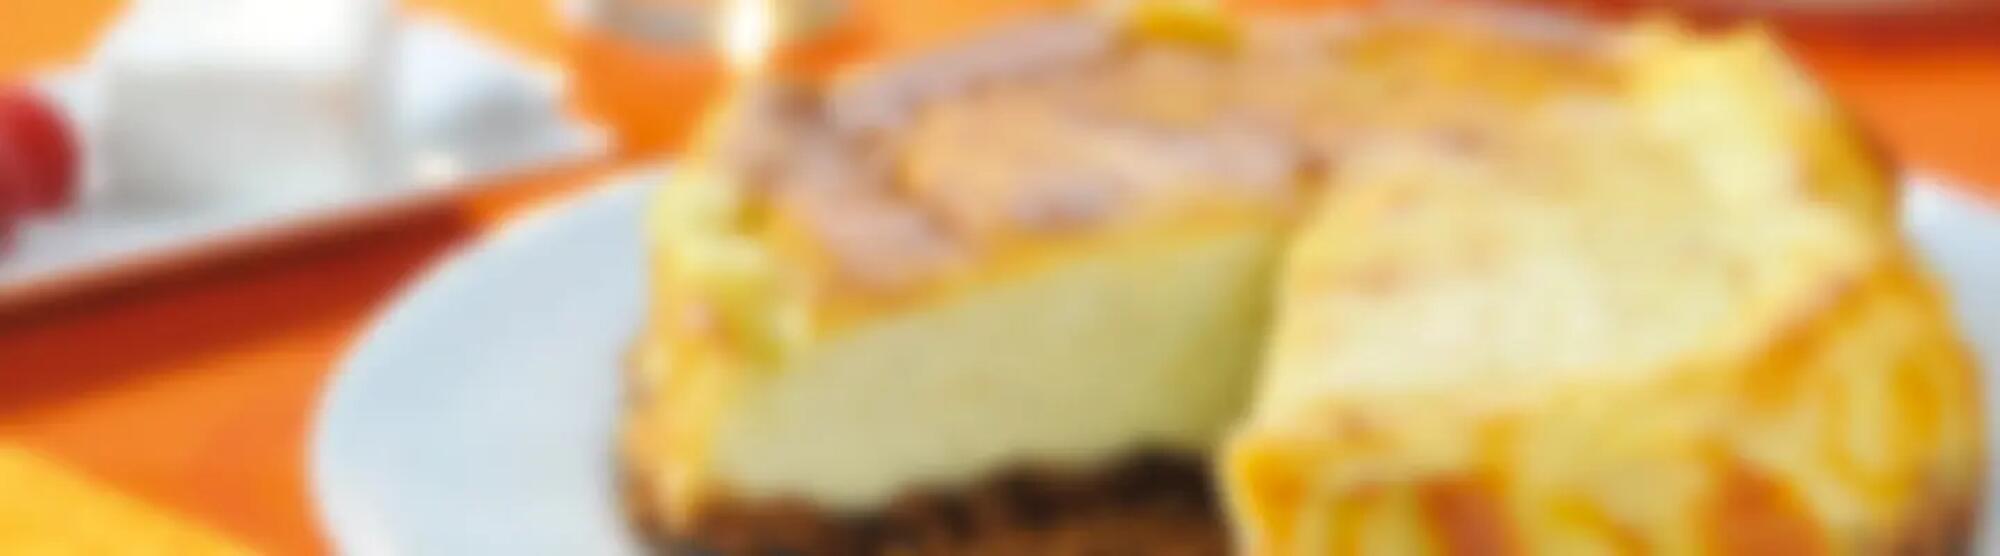 Recette : Cheesecake au fromage frais